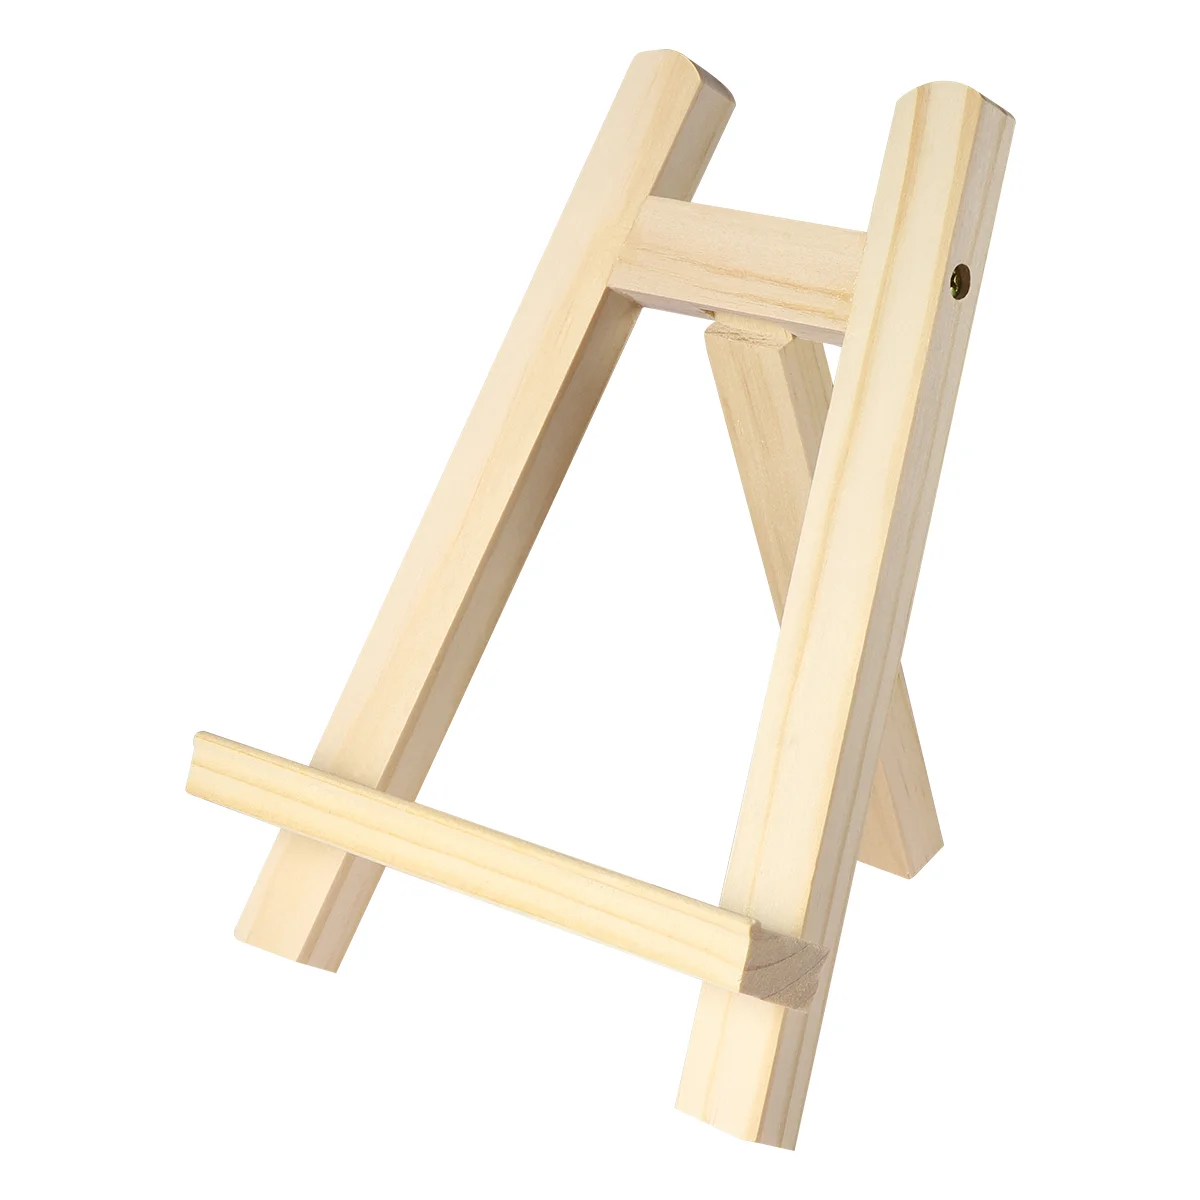 

STOBOK Tabletop Display Artist Easel Stand, Craft Painting Easel Wood Display Easel Wooden Triangle Easel Apply for Canvases